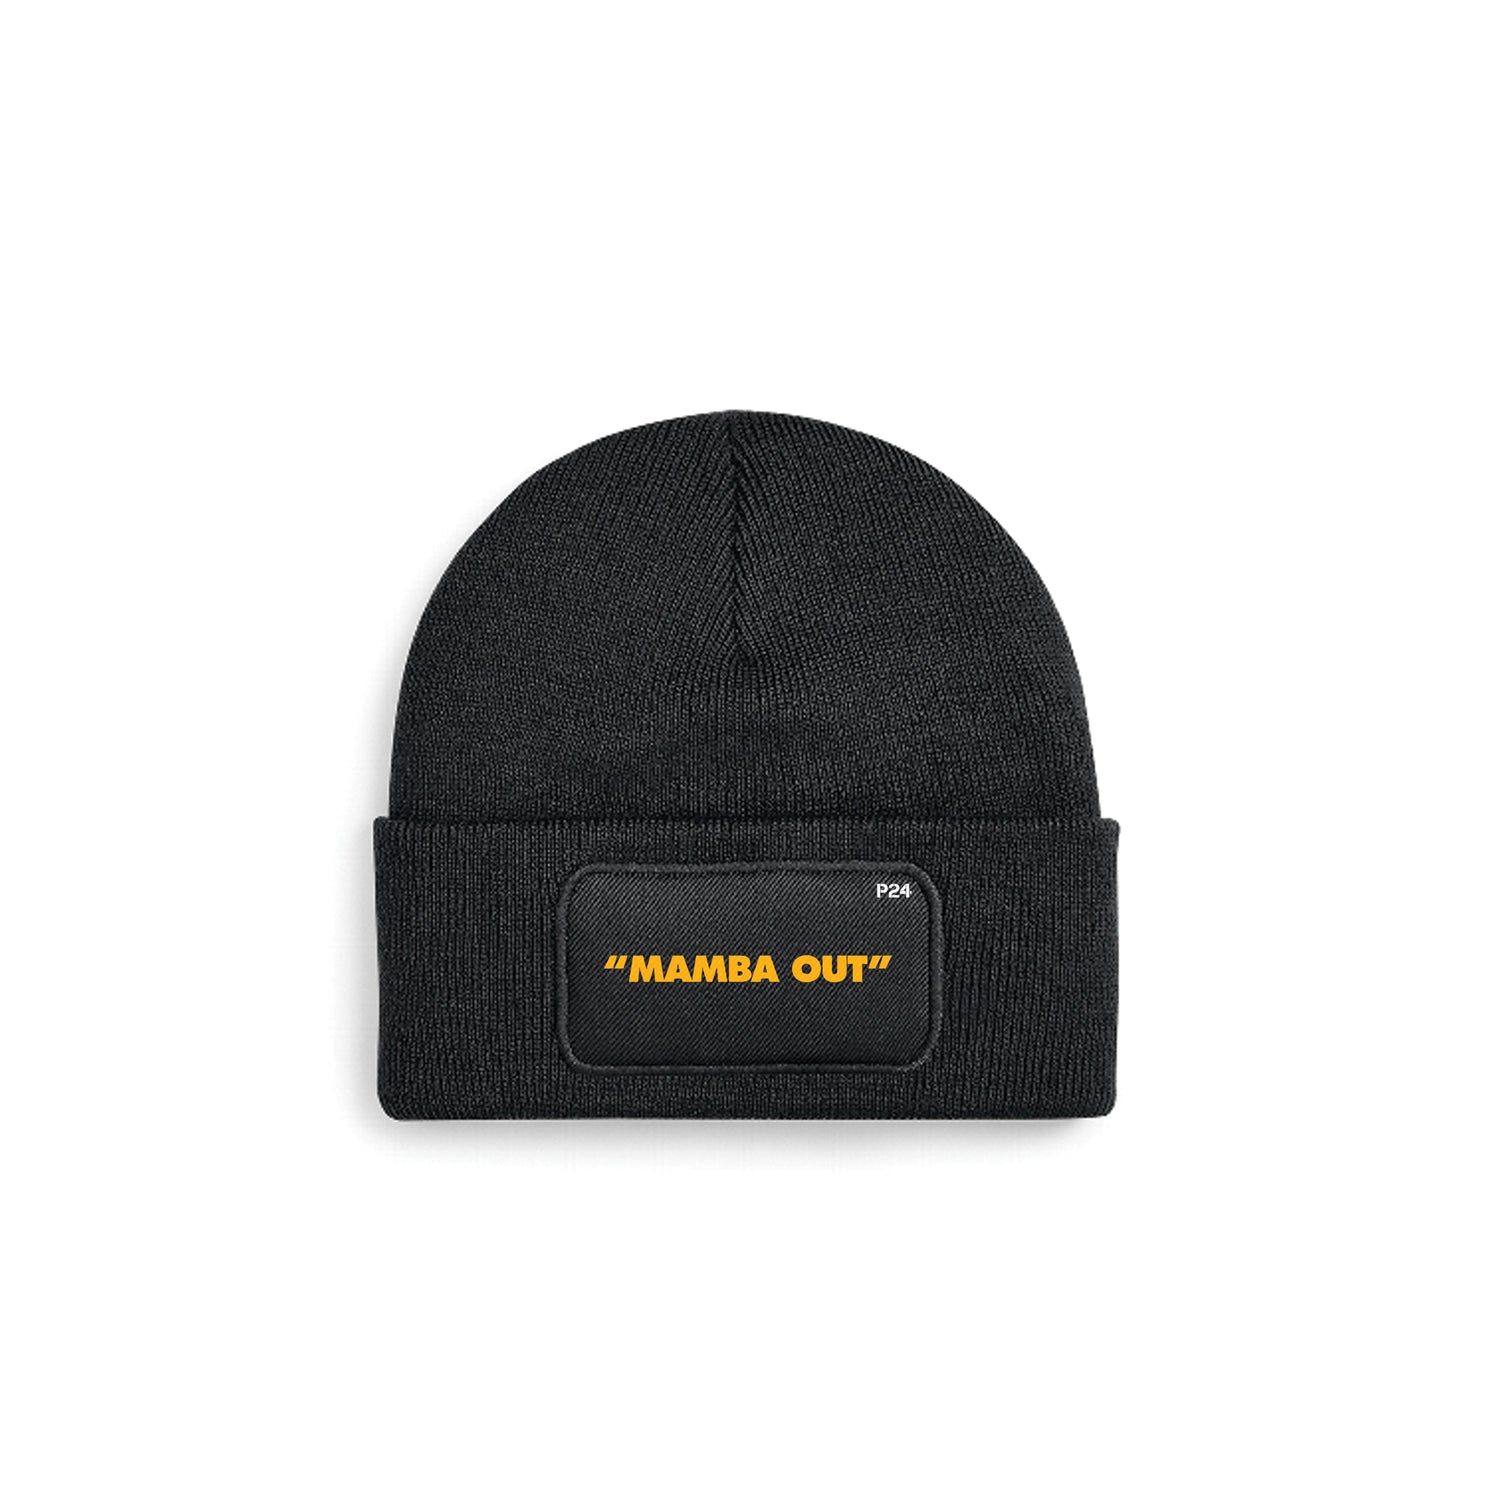 "Mamba Out" beanie PARALLELO24